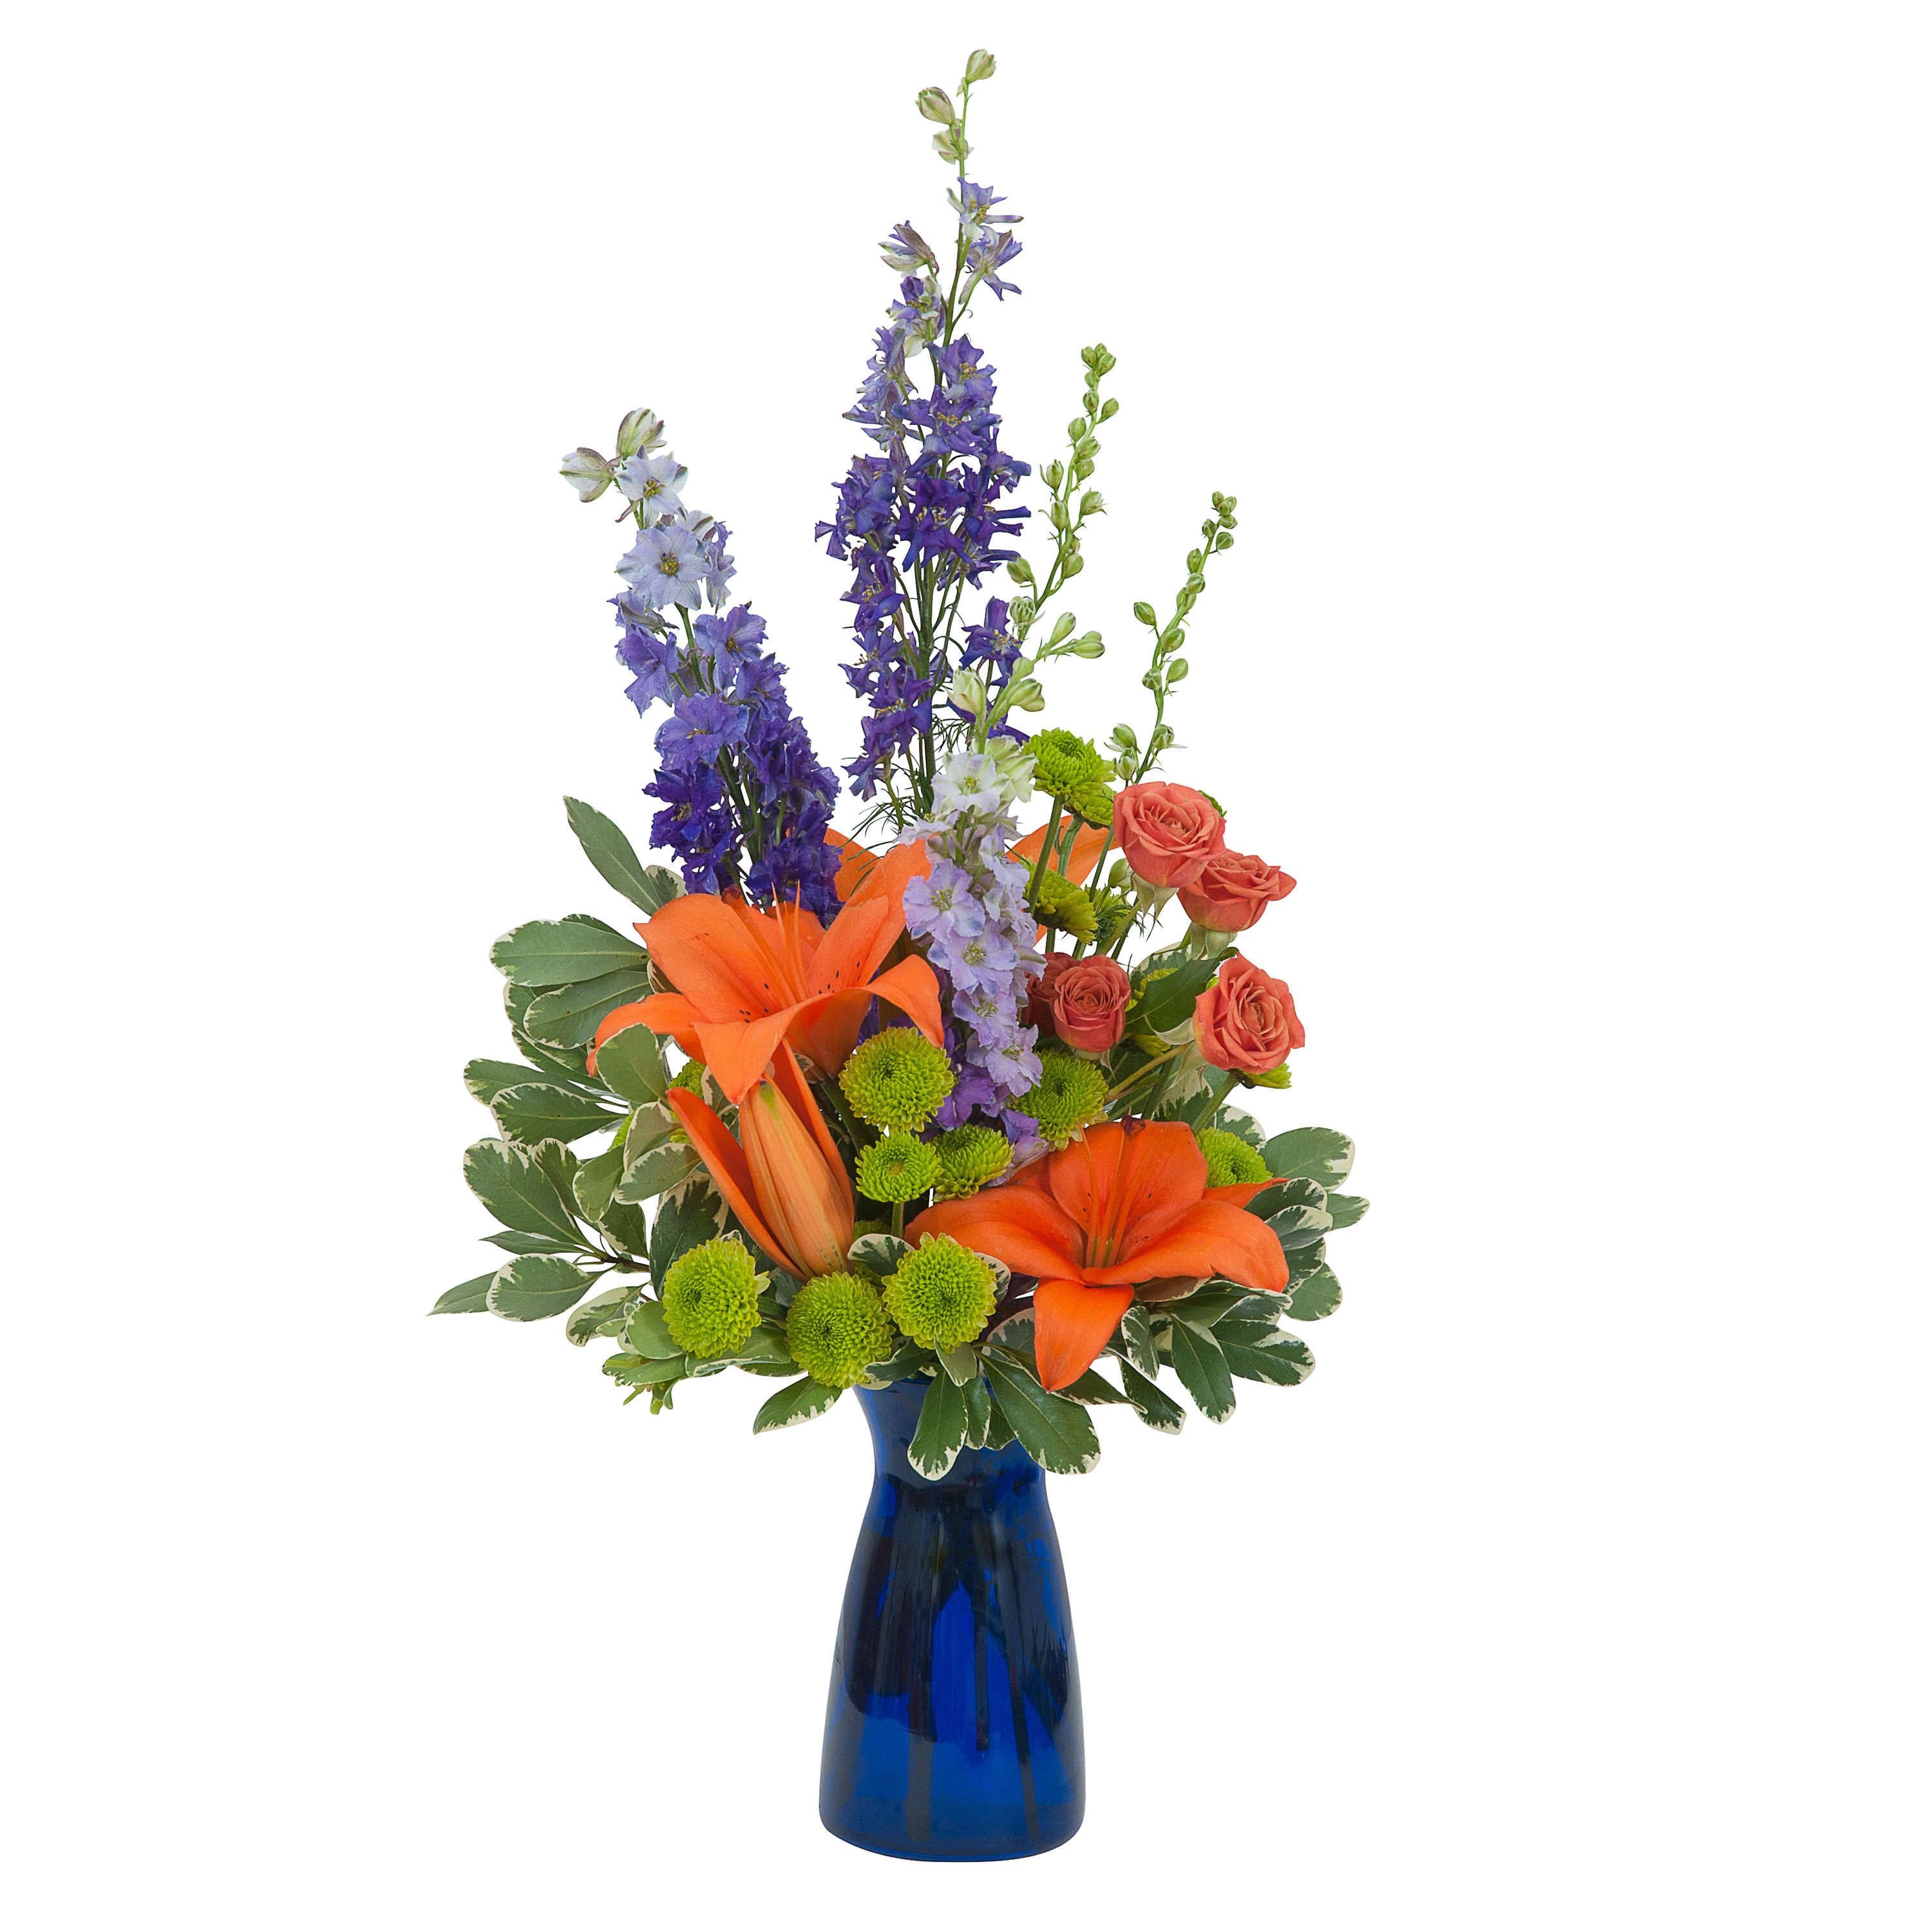 Cheer the Blues - This bright and cheerful vase of flowers will add cheer for any occasion.TMF-609